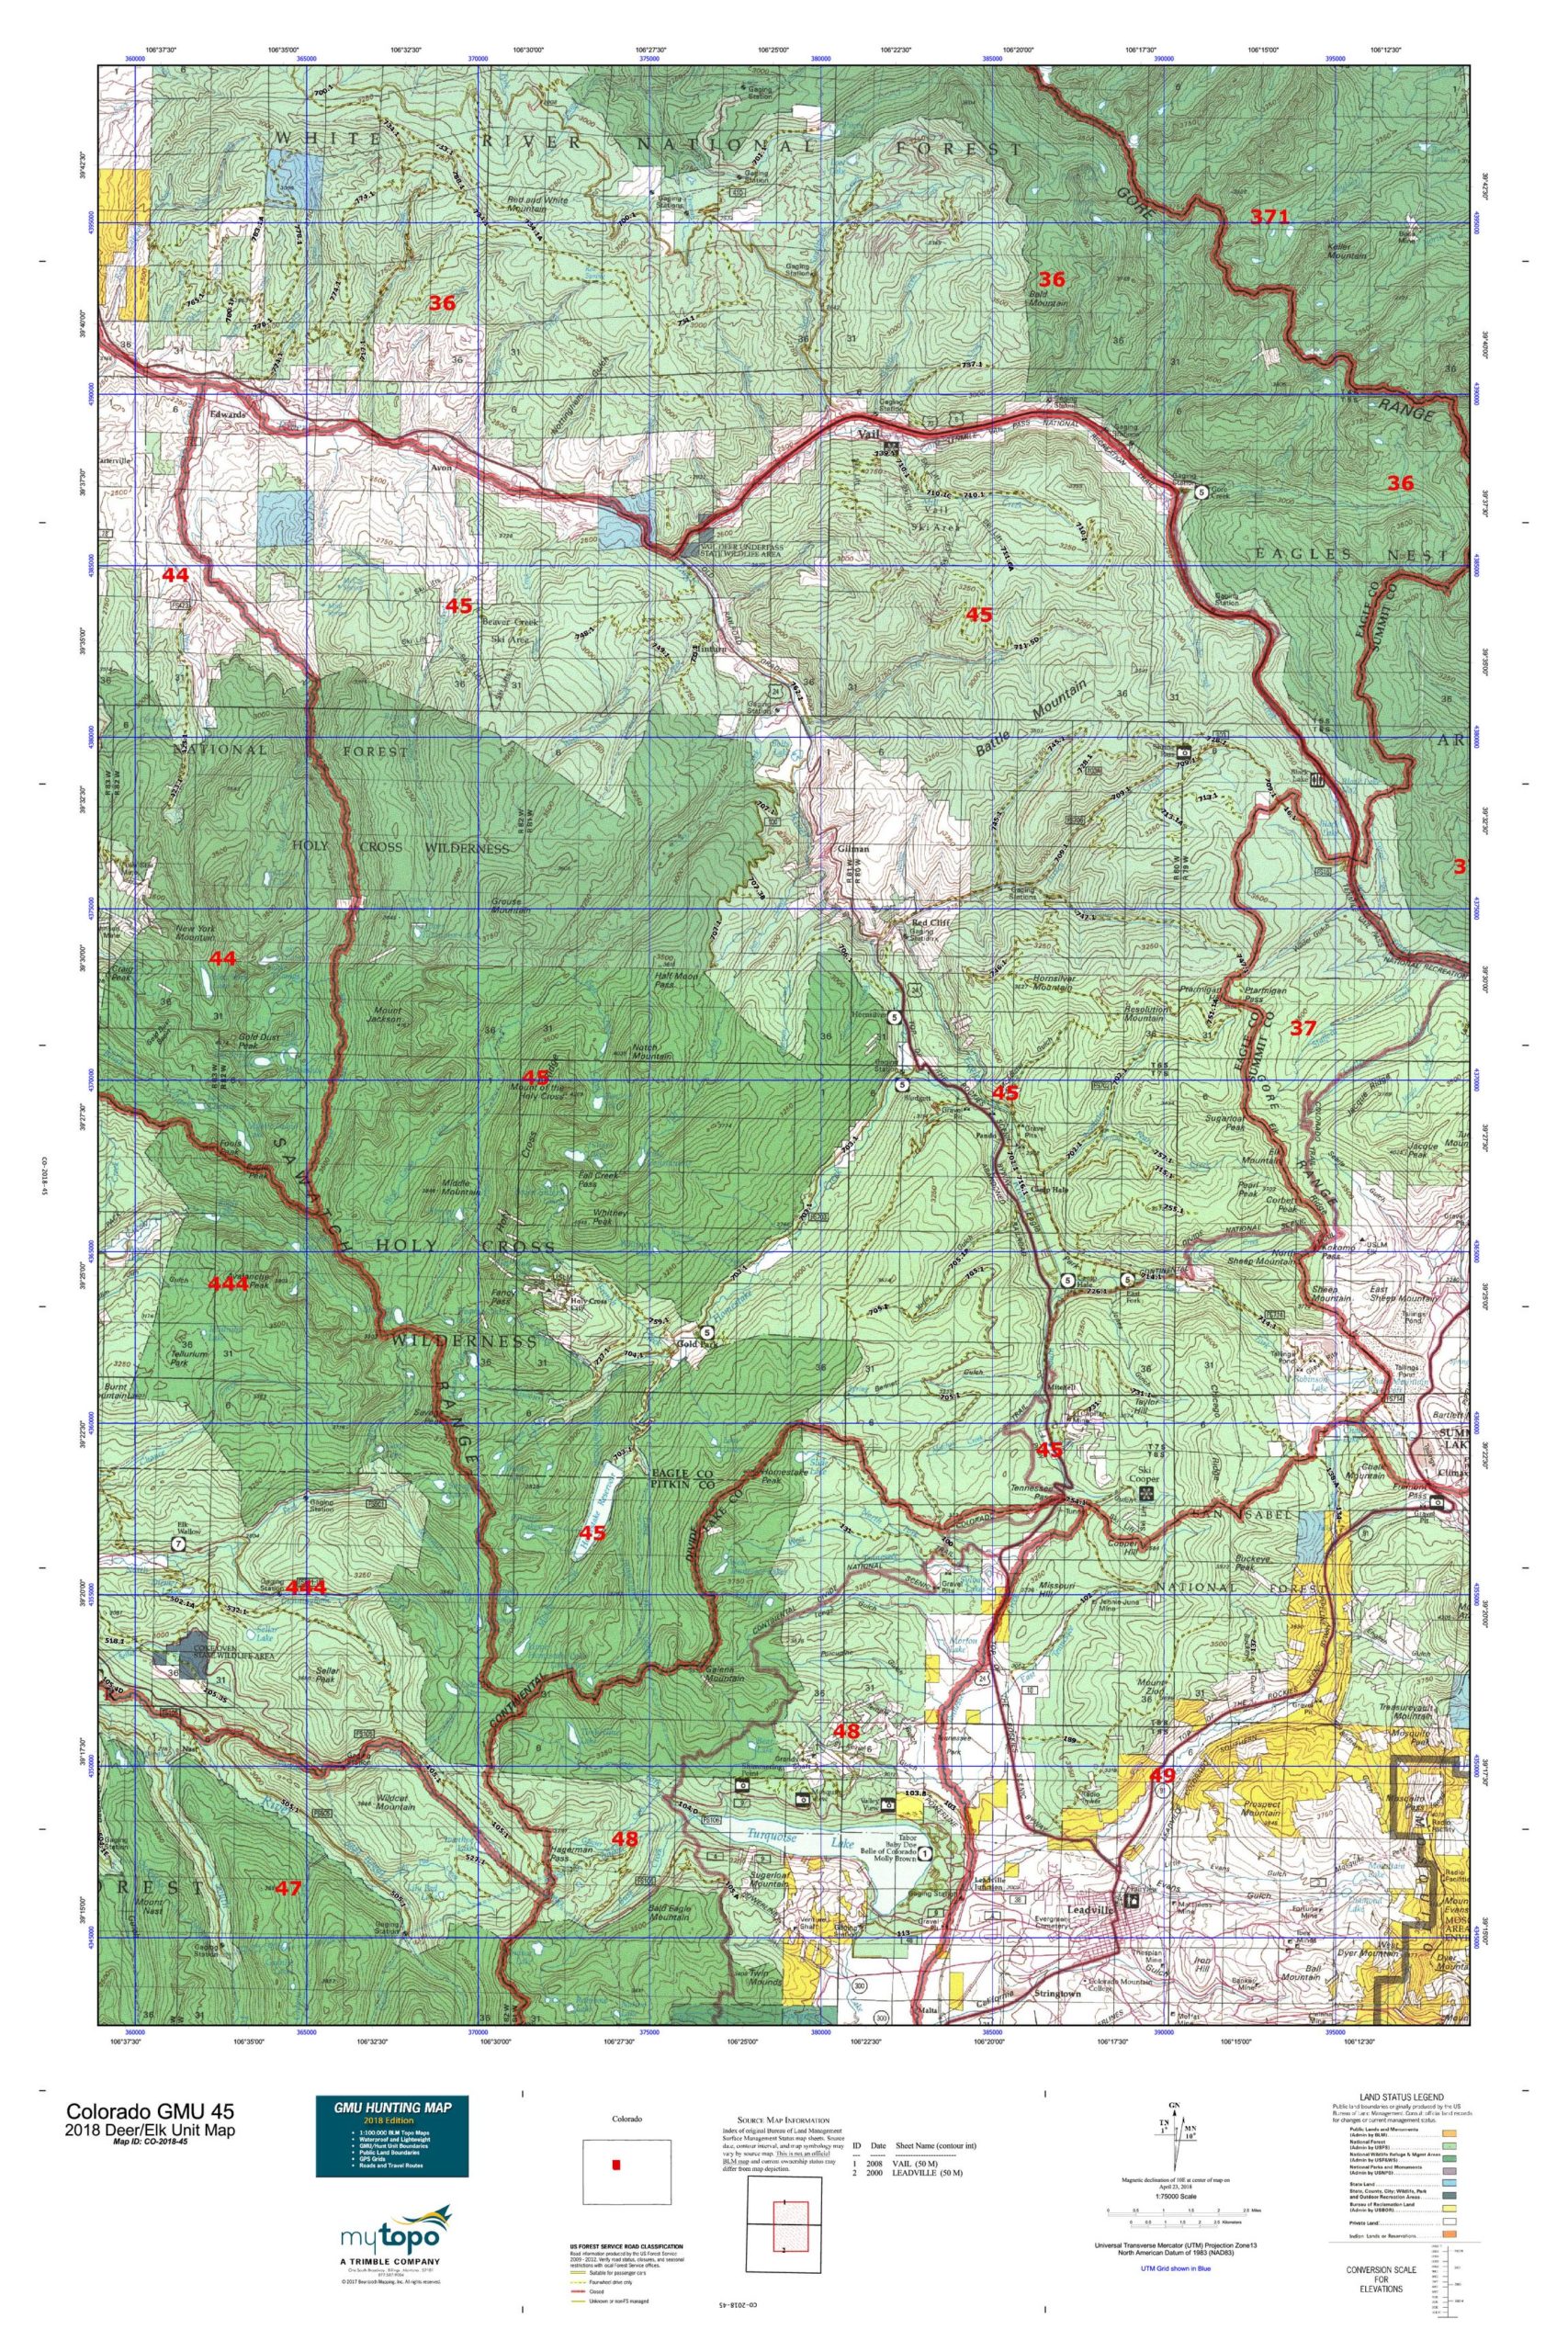 Colorado-unit-45-hunting-map-scaled